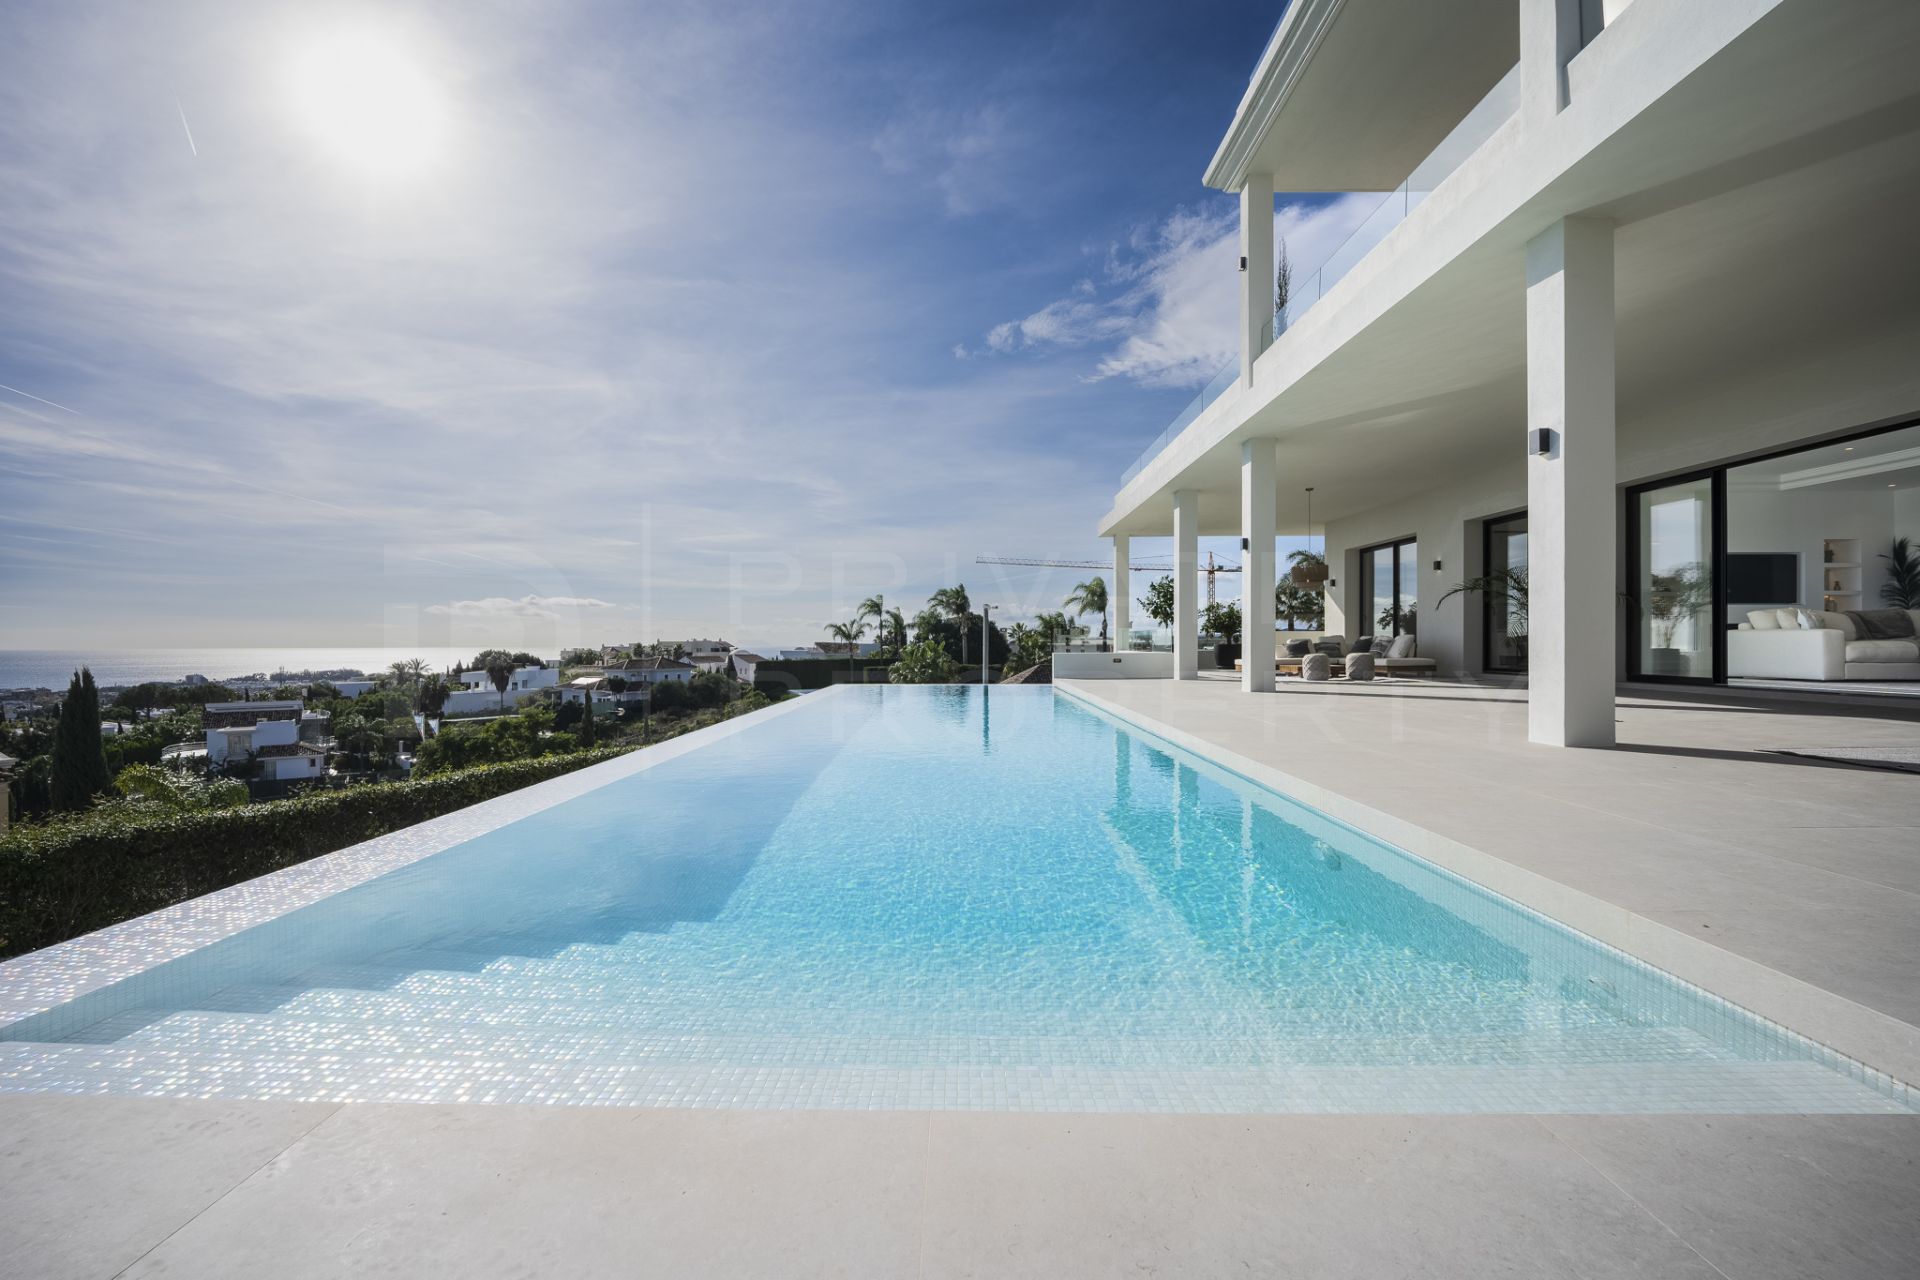 Luxury villa with spectacular panoramic views in Los Flamingos